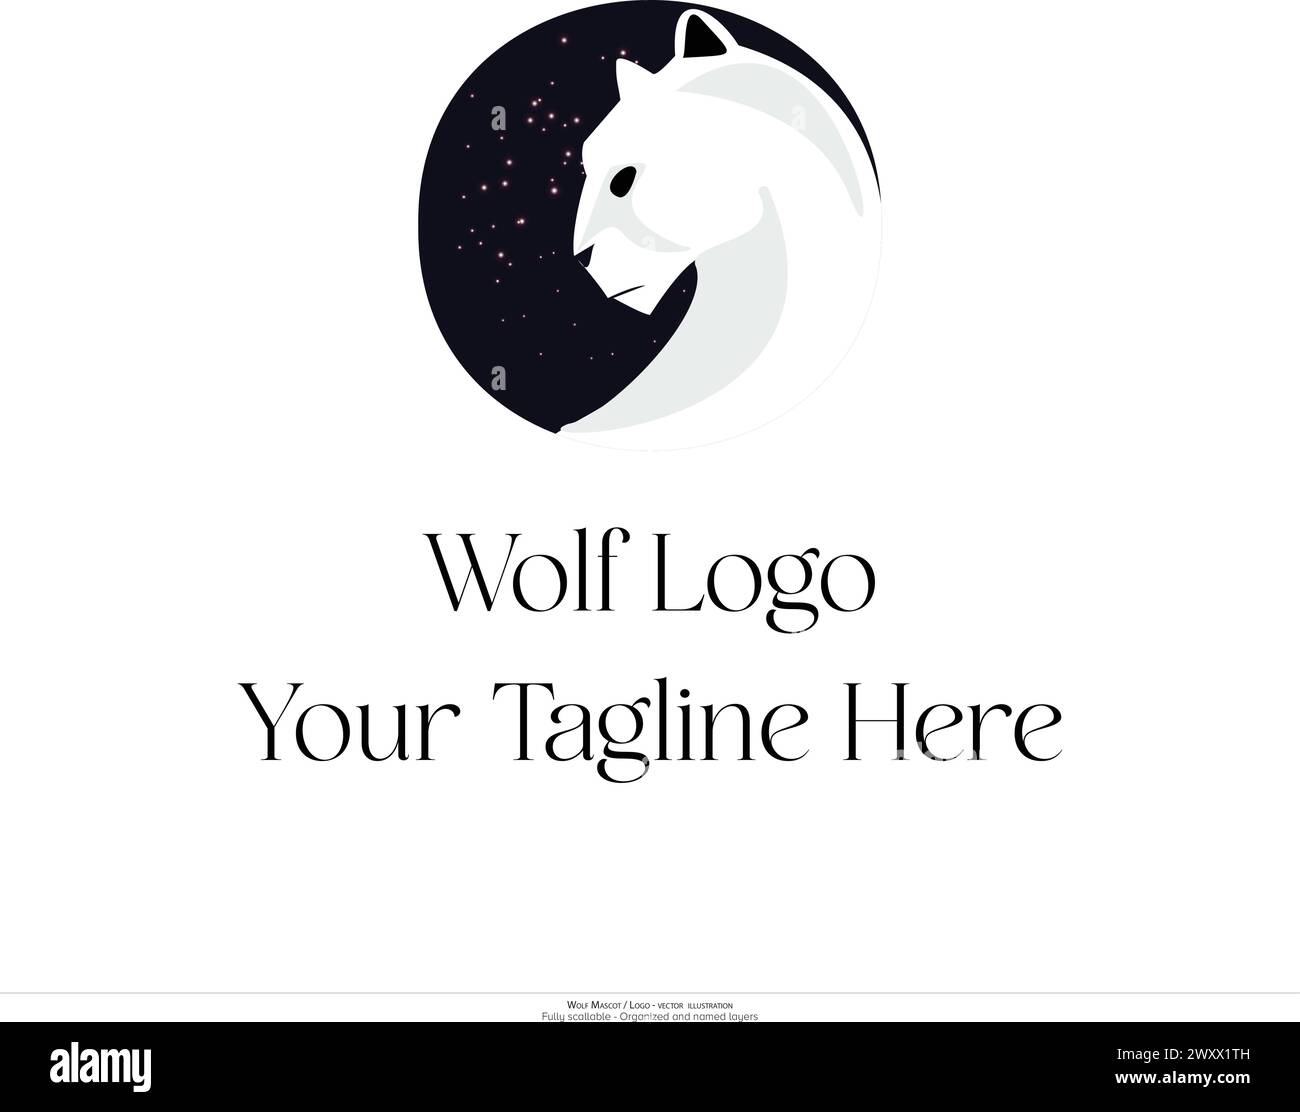 Wolf logo, Animal logo. vector illustration. minimalistic wolf drawing. Wolf with stars in the background. Starry background. Stock Vector